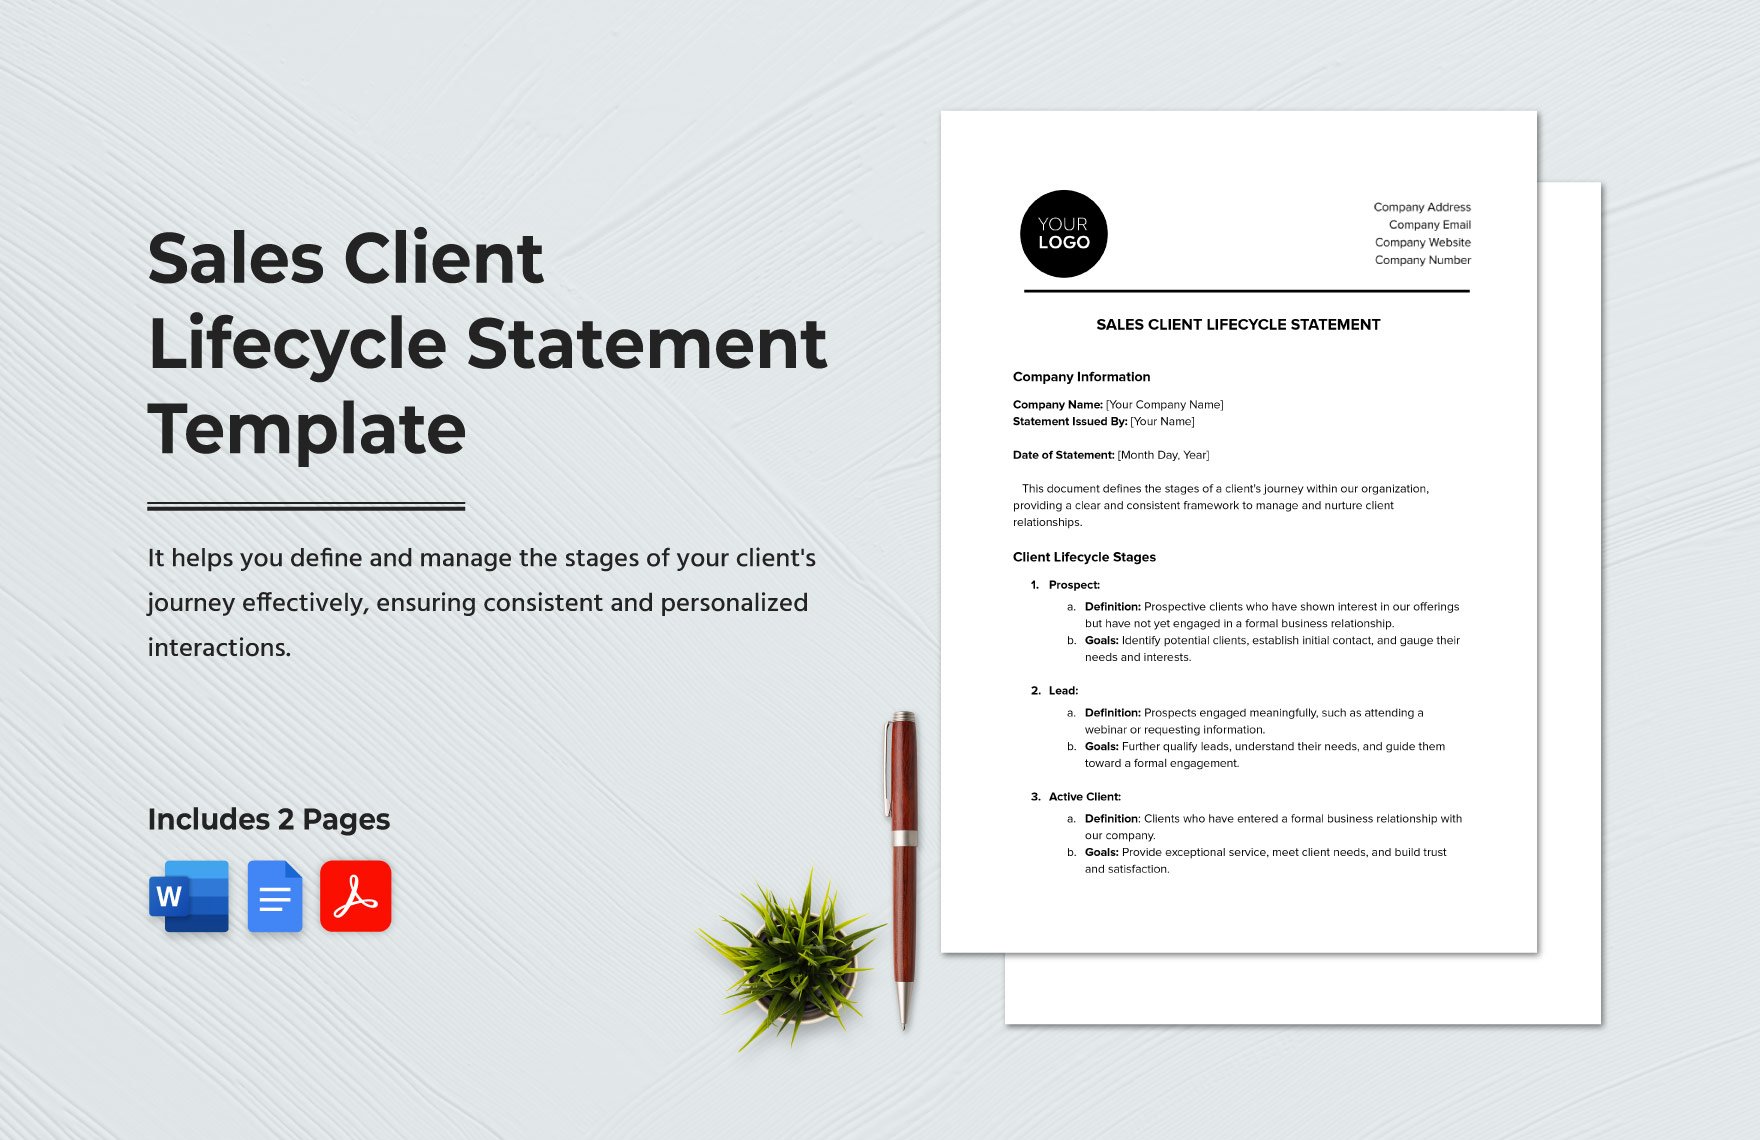 Sales Client Lifecycle Statement Template in Word, Google Docs, PDF